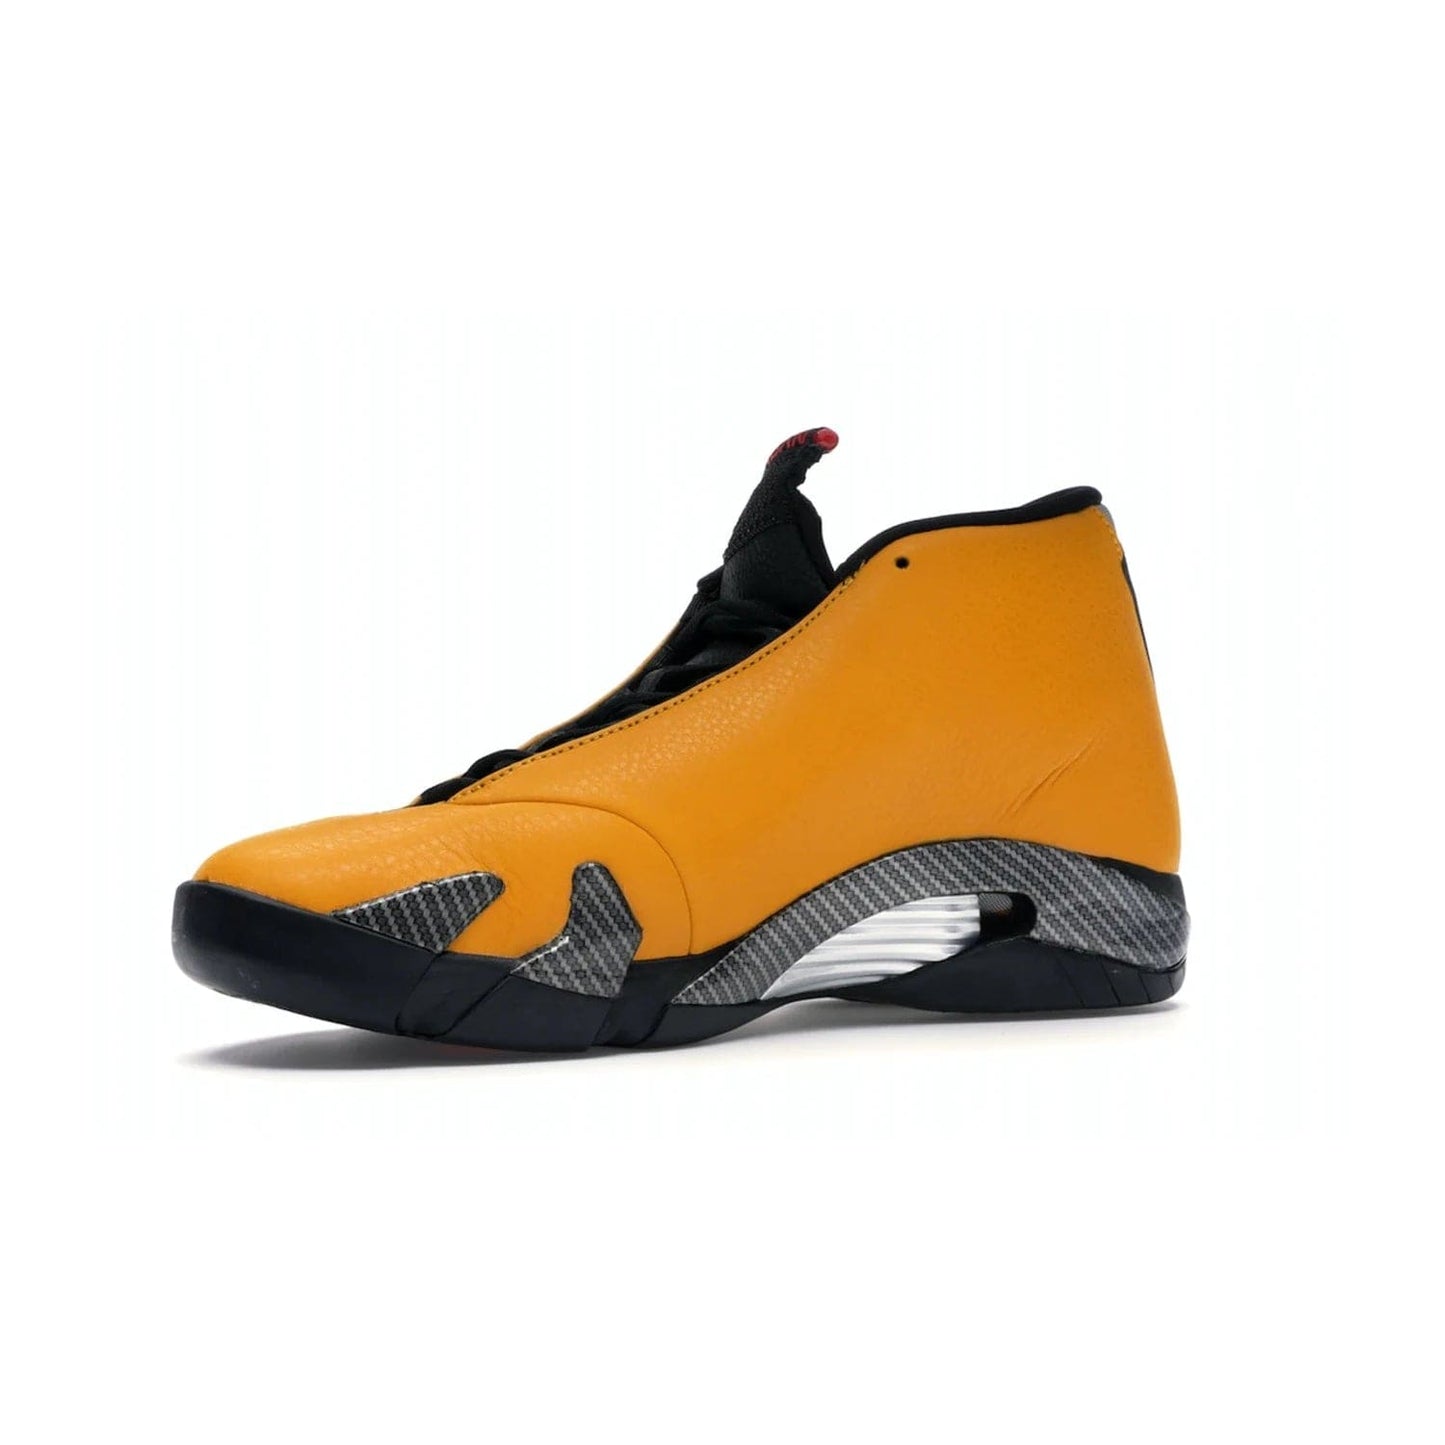 Jordan 14 Retro University Gold - Image 16 - Only at www.BallersClubKickz.com - Air Jordan 14 Retro University Gold: High-quality leather sneaker with Jumpman, tongue & heel logos. Zoom Air units & herringbone traction for superior comfort. University Gold outsole for stylish streetwear.